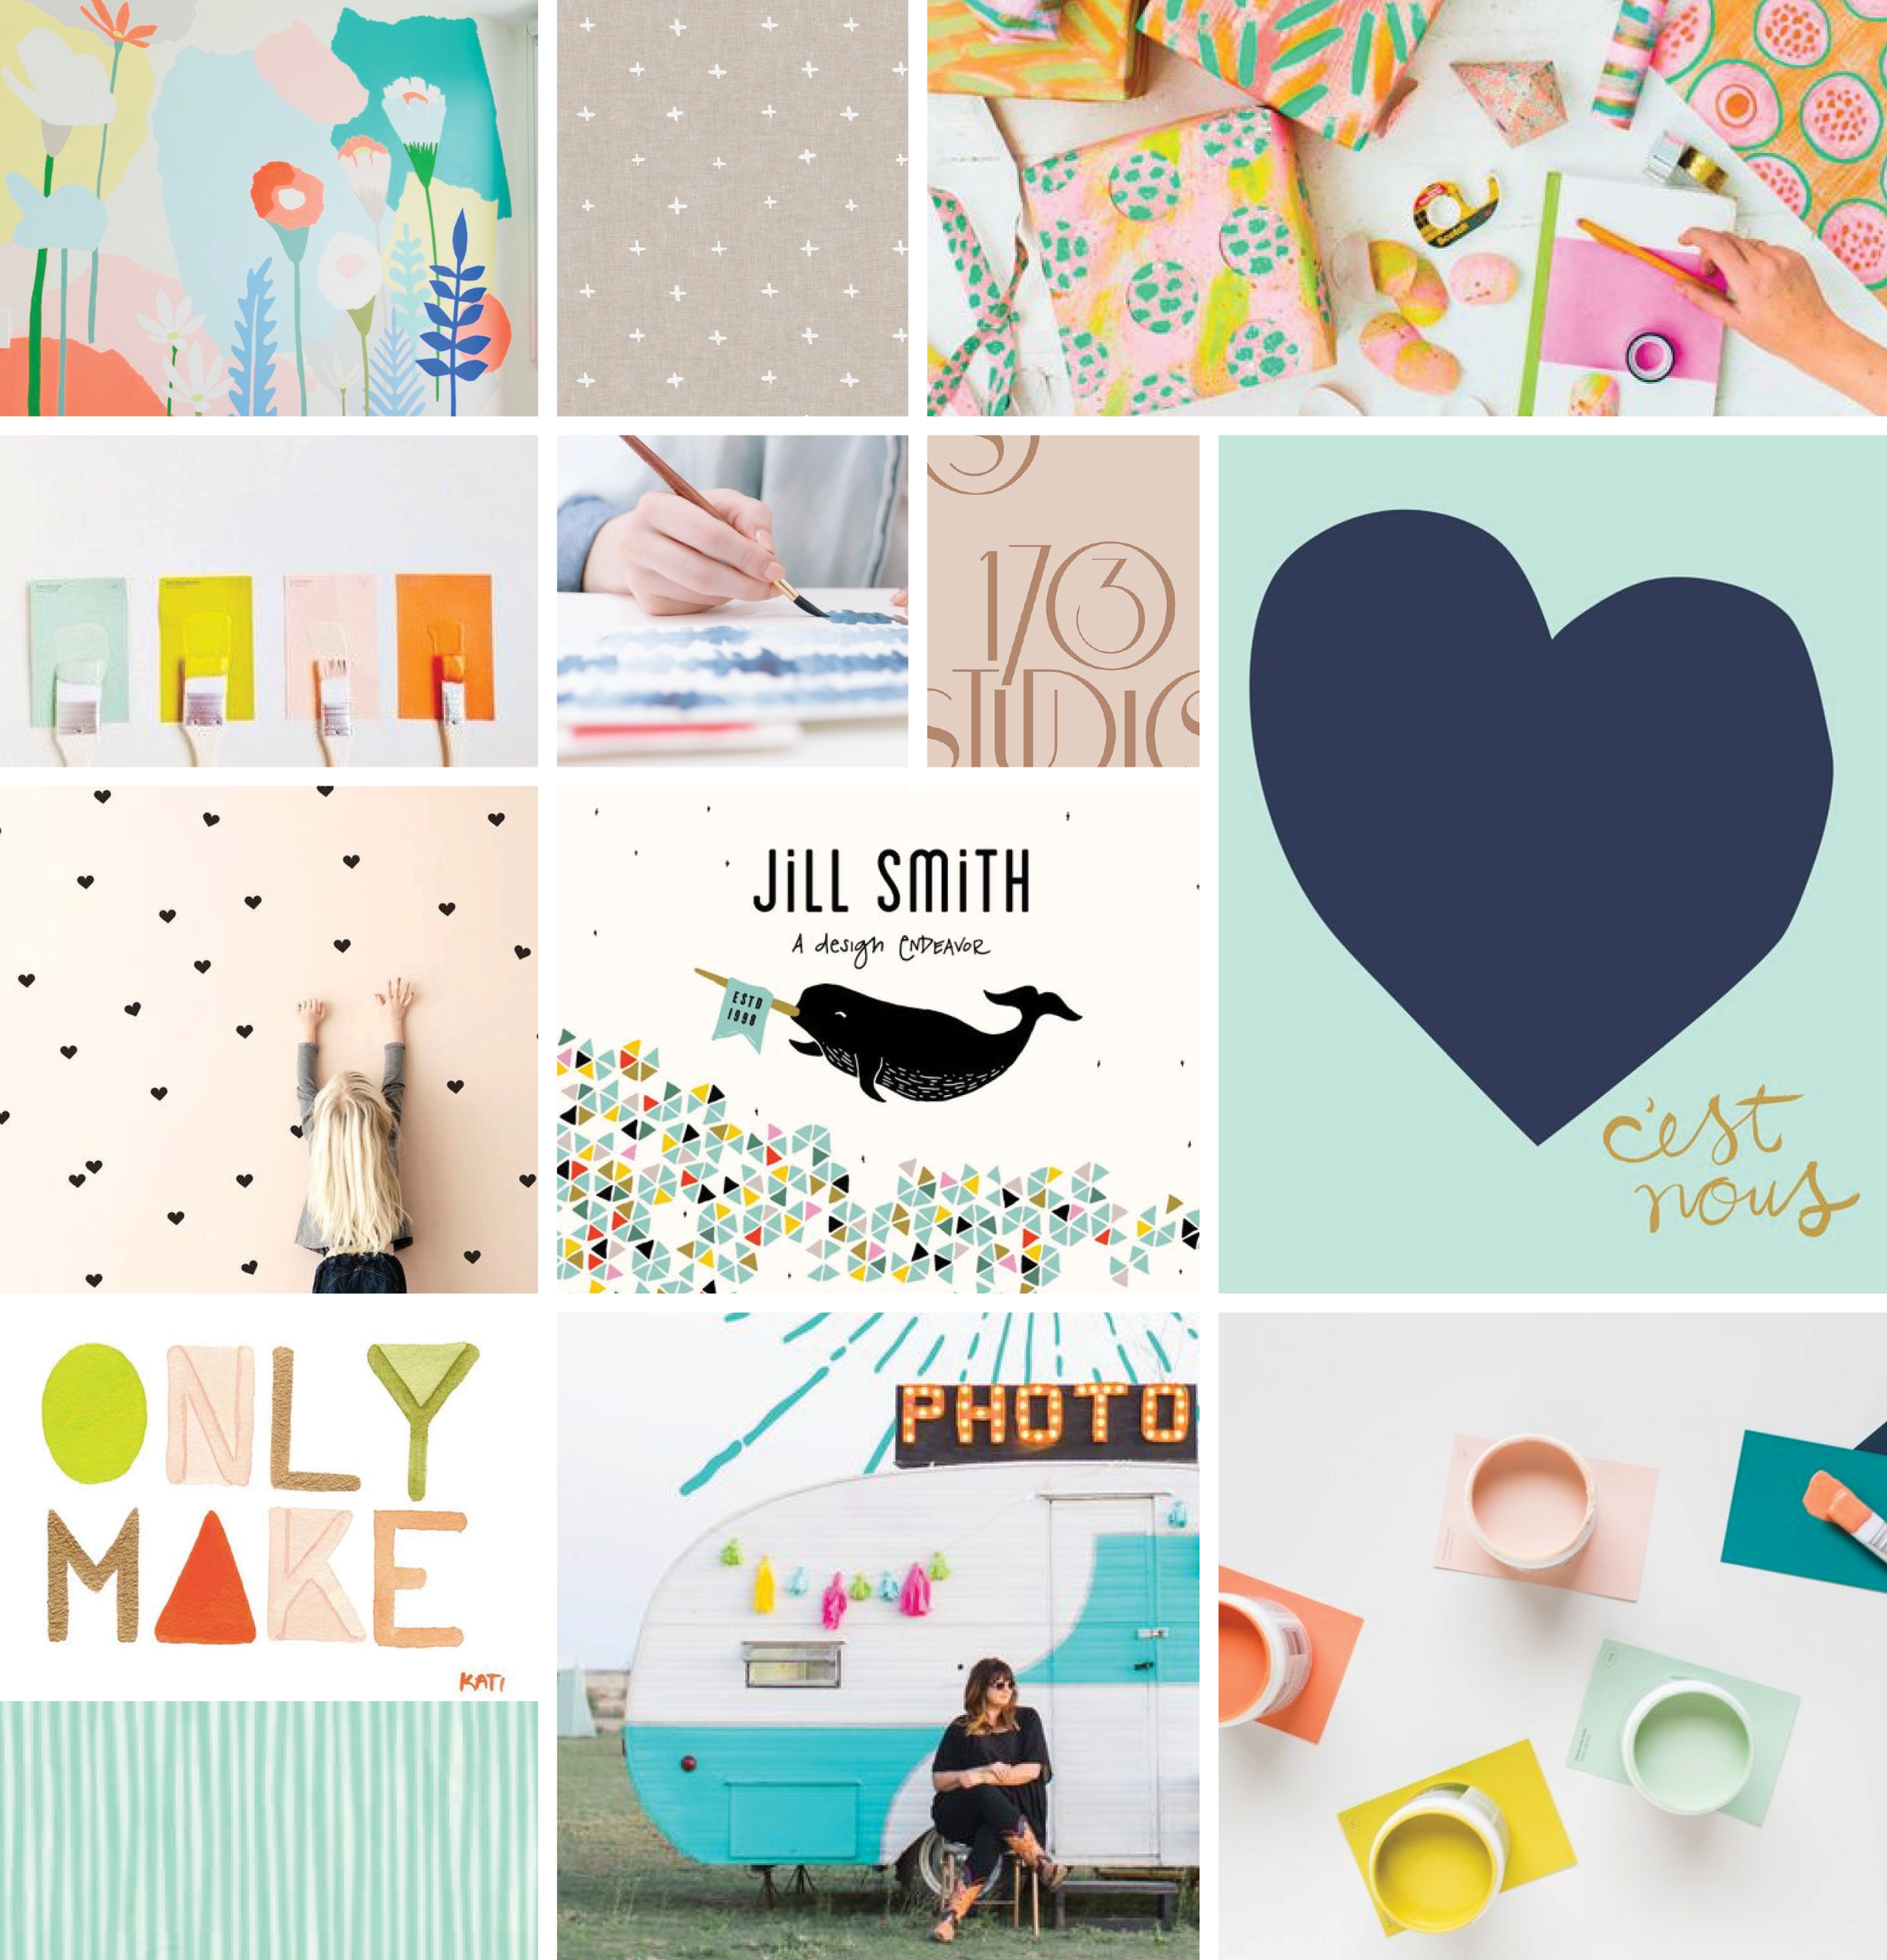 visual brand vibe: creative, whimsical, crafted + playful